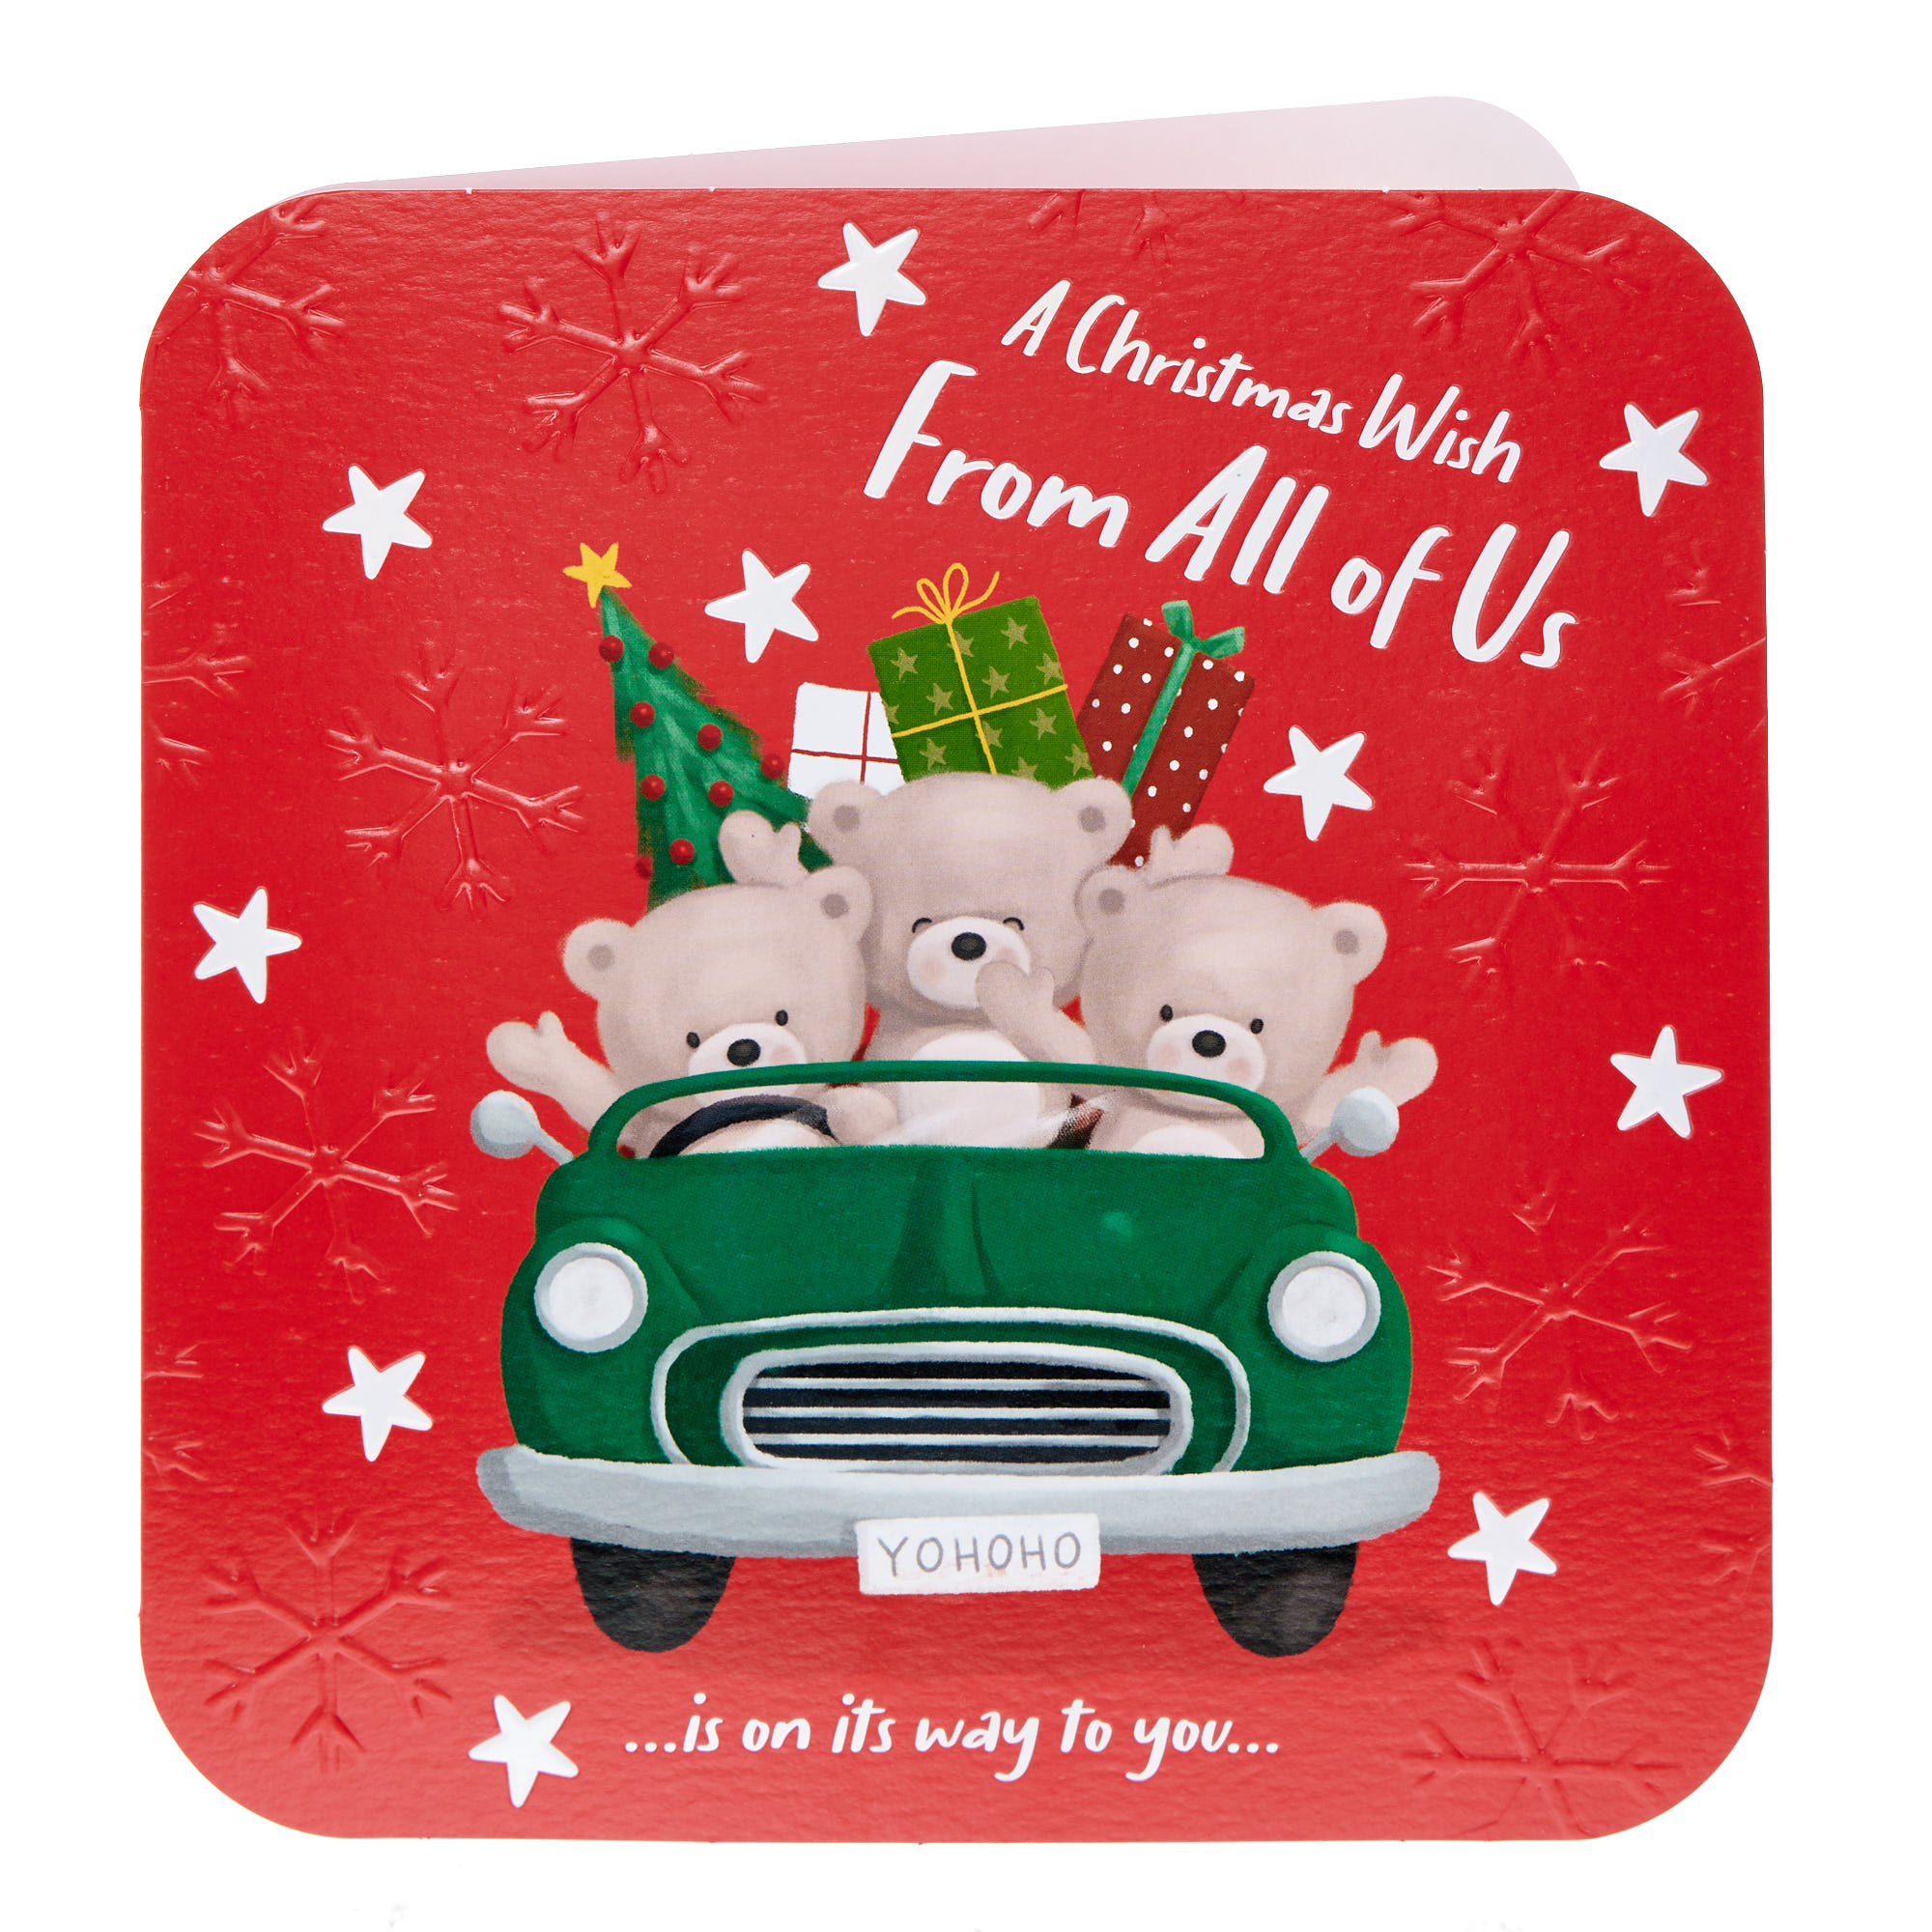 From All Of Us Hugs Bears In Car Christmas Card